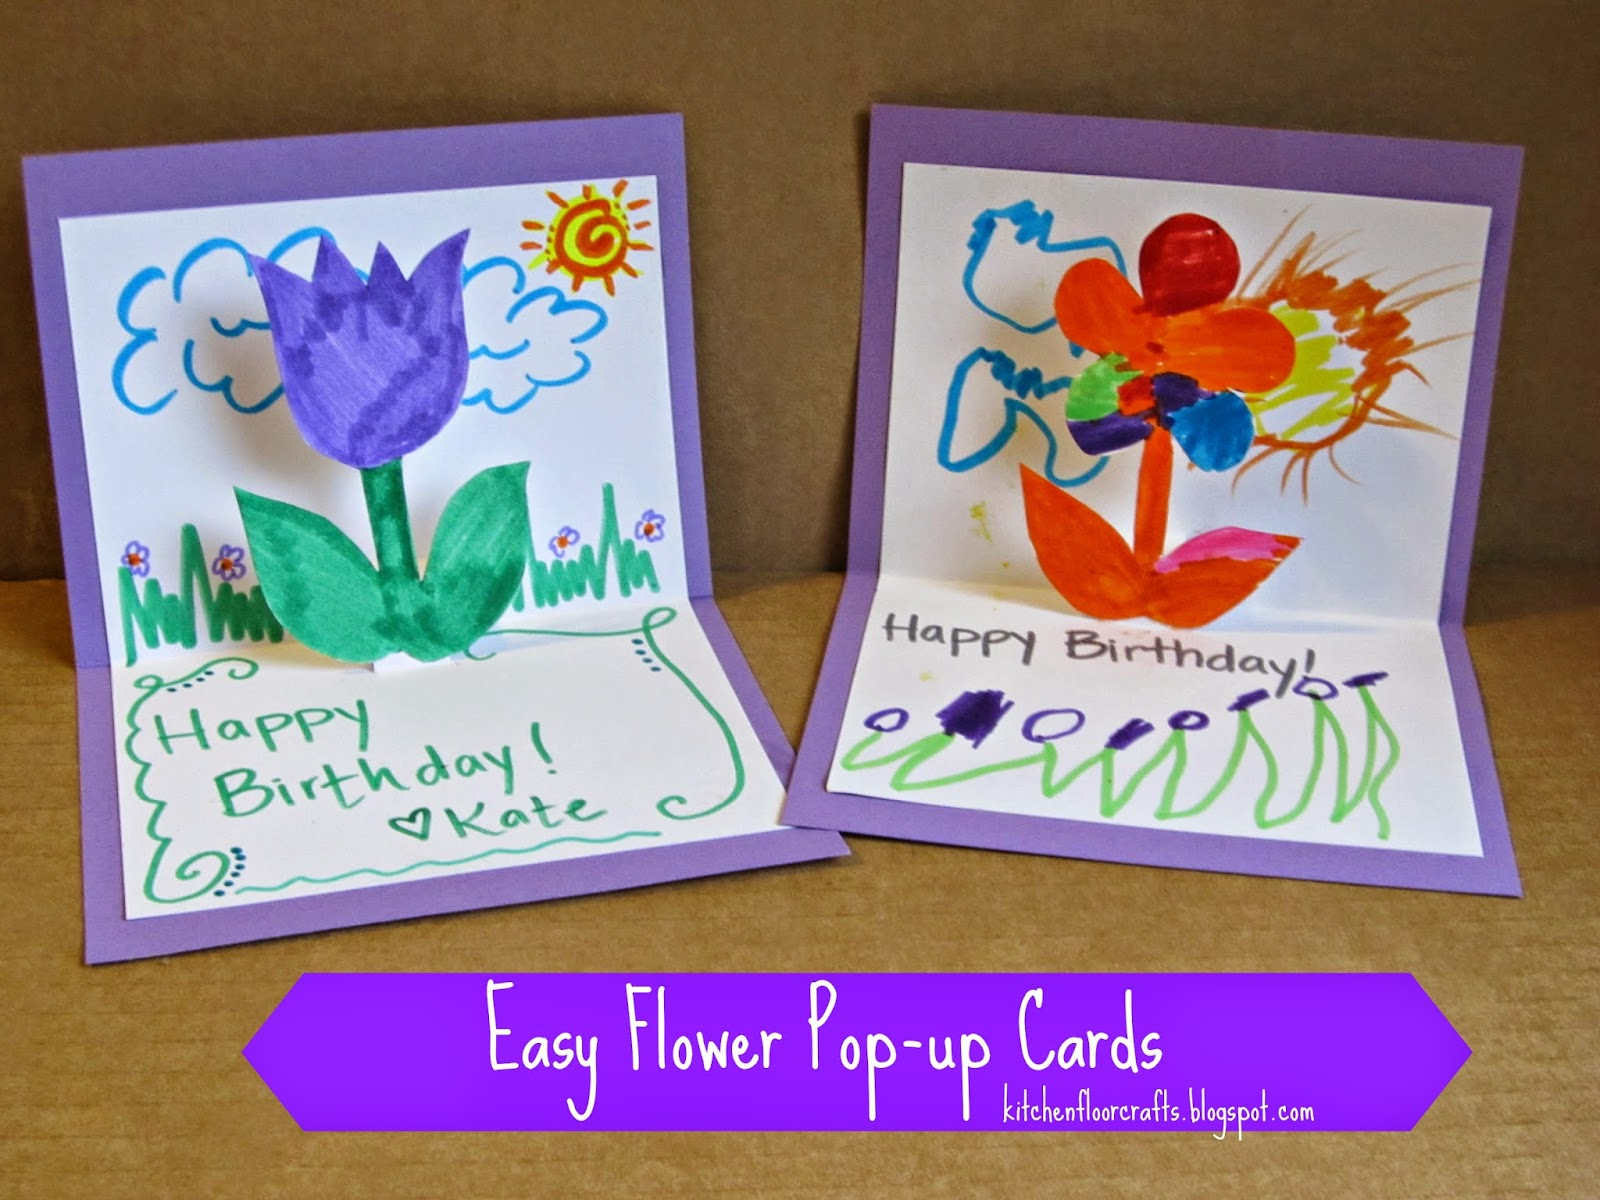 Easy Birthday Card Ideas For Kids Funny Homemade Birthday For Mom Card Ideas From Daughter Envelopes